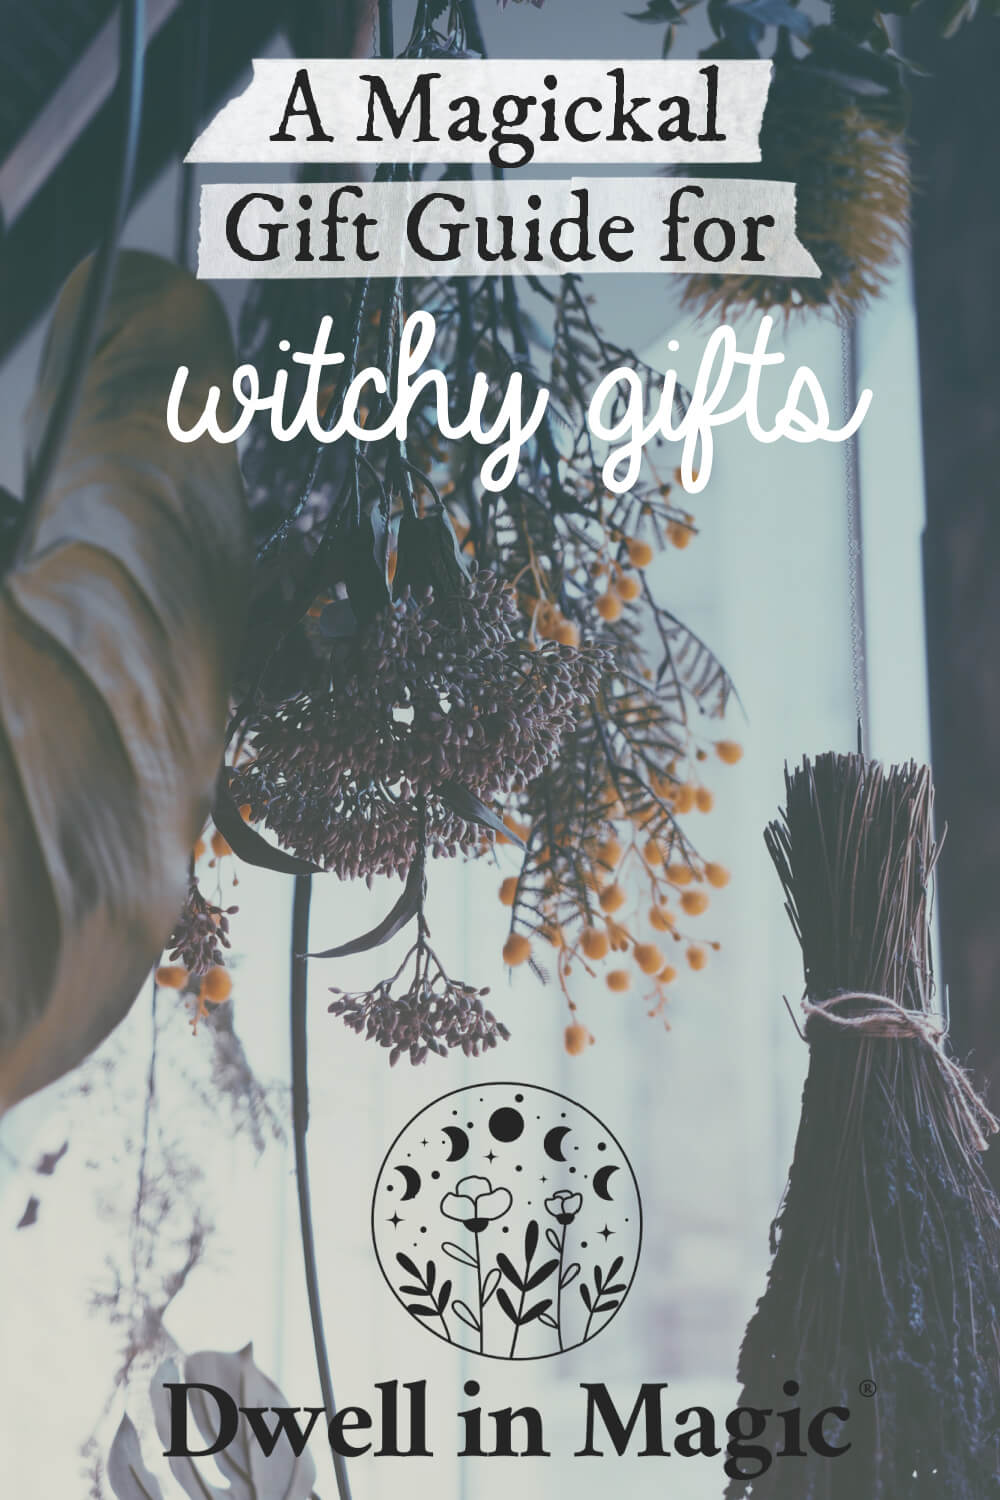 A magickal gift guide for witchy gifts